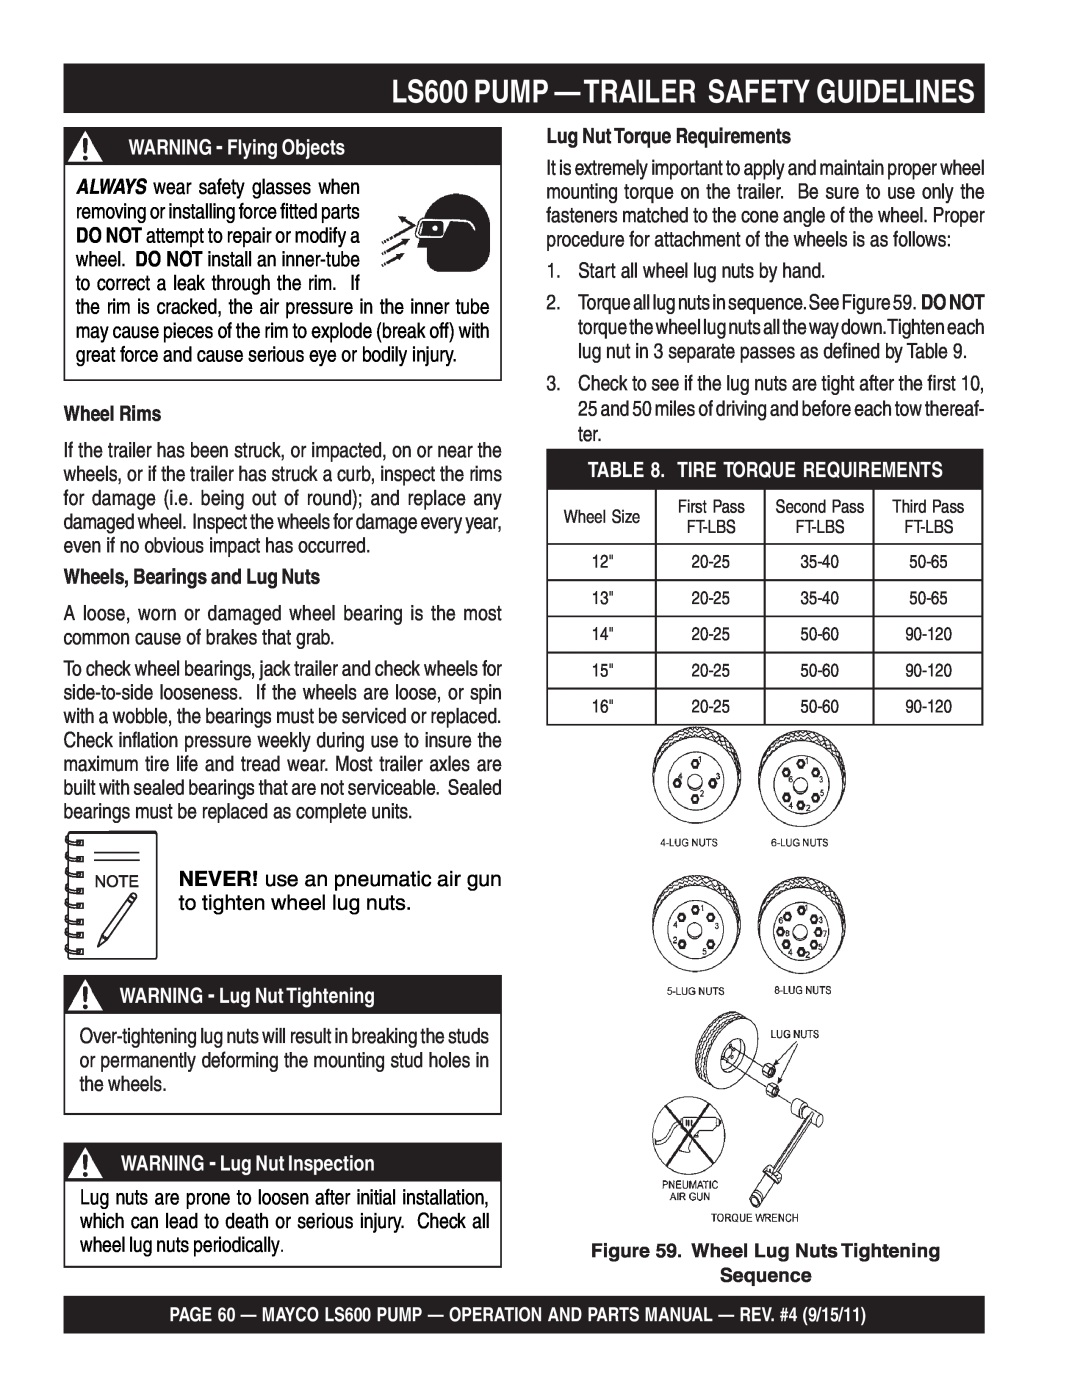 Multiquip LS600 PUMP —TRAILERSAFETY GUIDELINES, WARNING - Flying Objects, Wheel Rims, Wheels, Bearings and Lug Nuts 